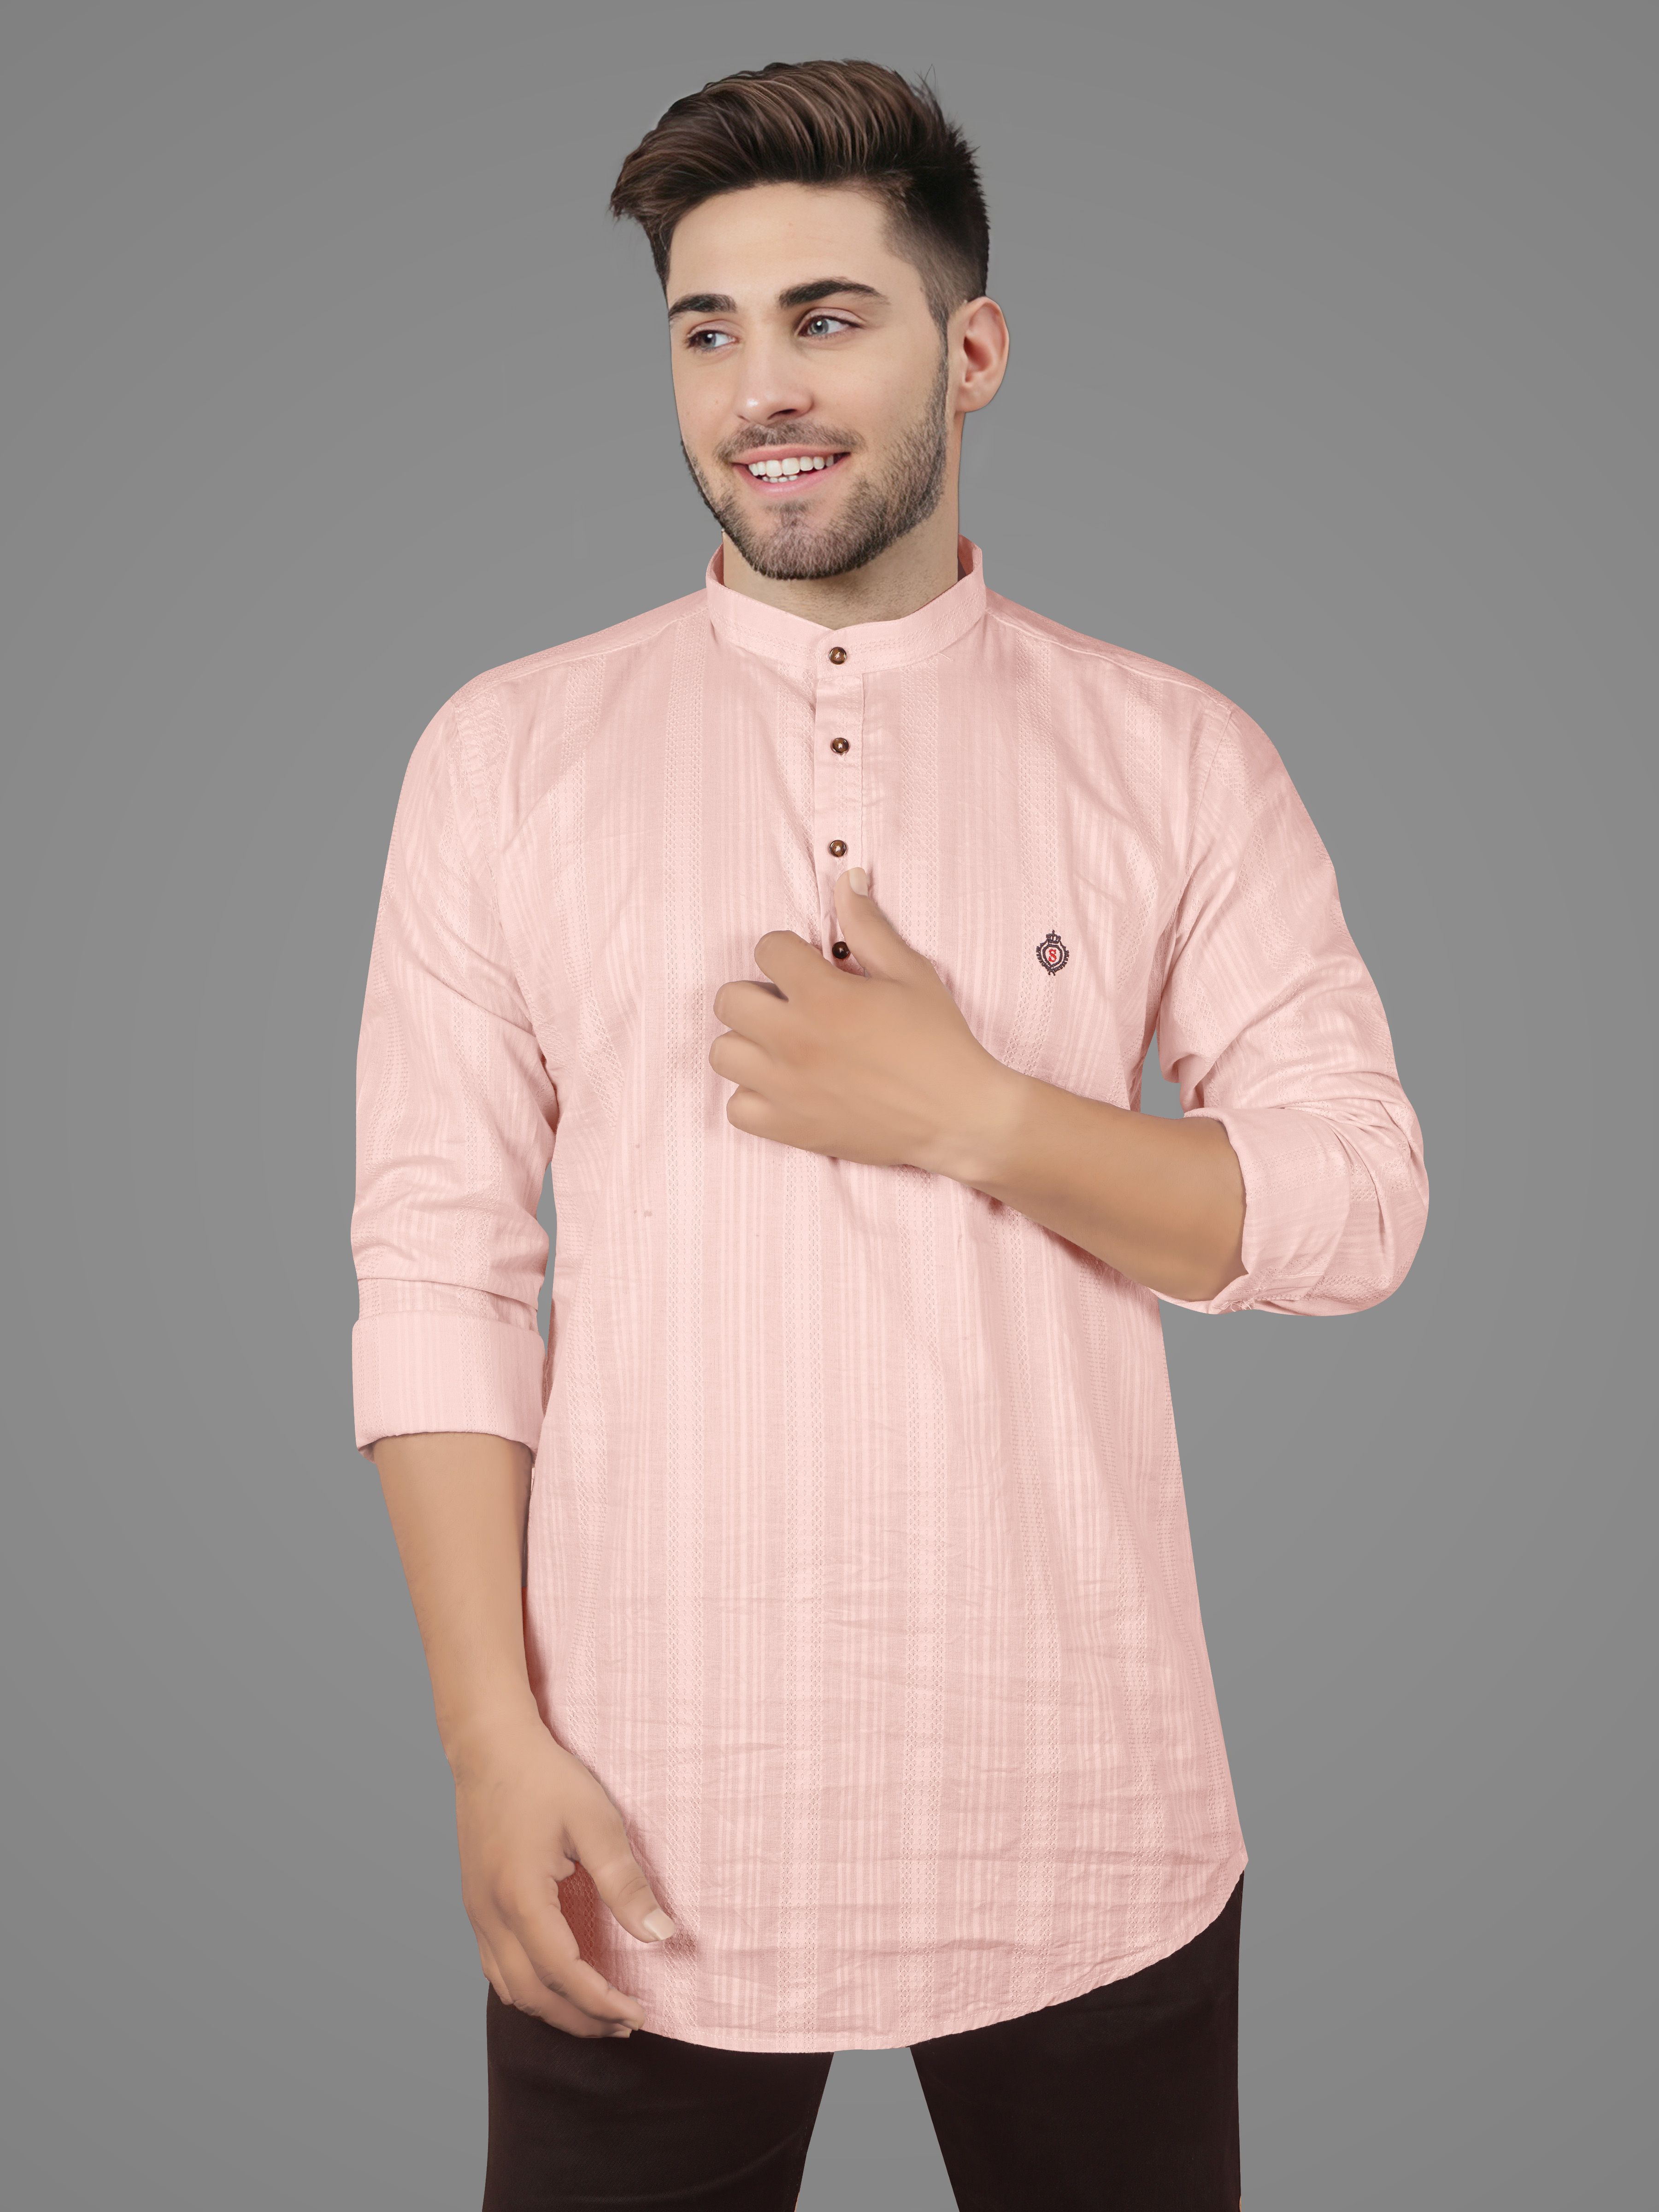     			JB JUST BLACK 100% Cotton Regular Fit Solids Full Sleeves Men's Casual Shirt - Pink ( Pack of 1 )